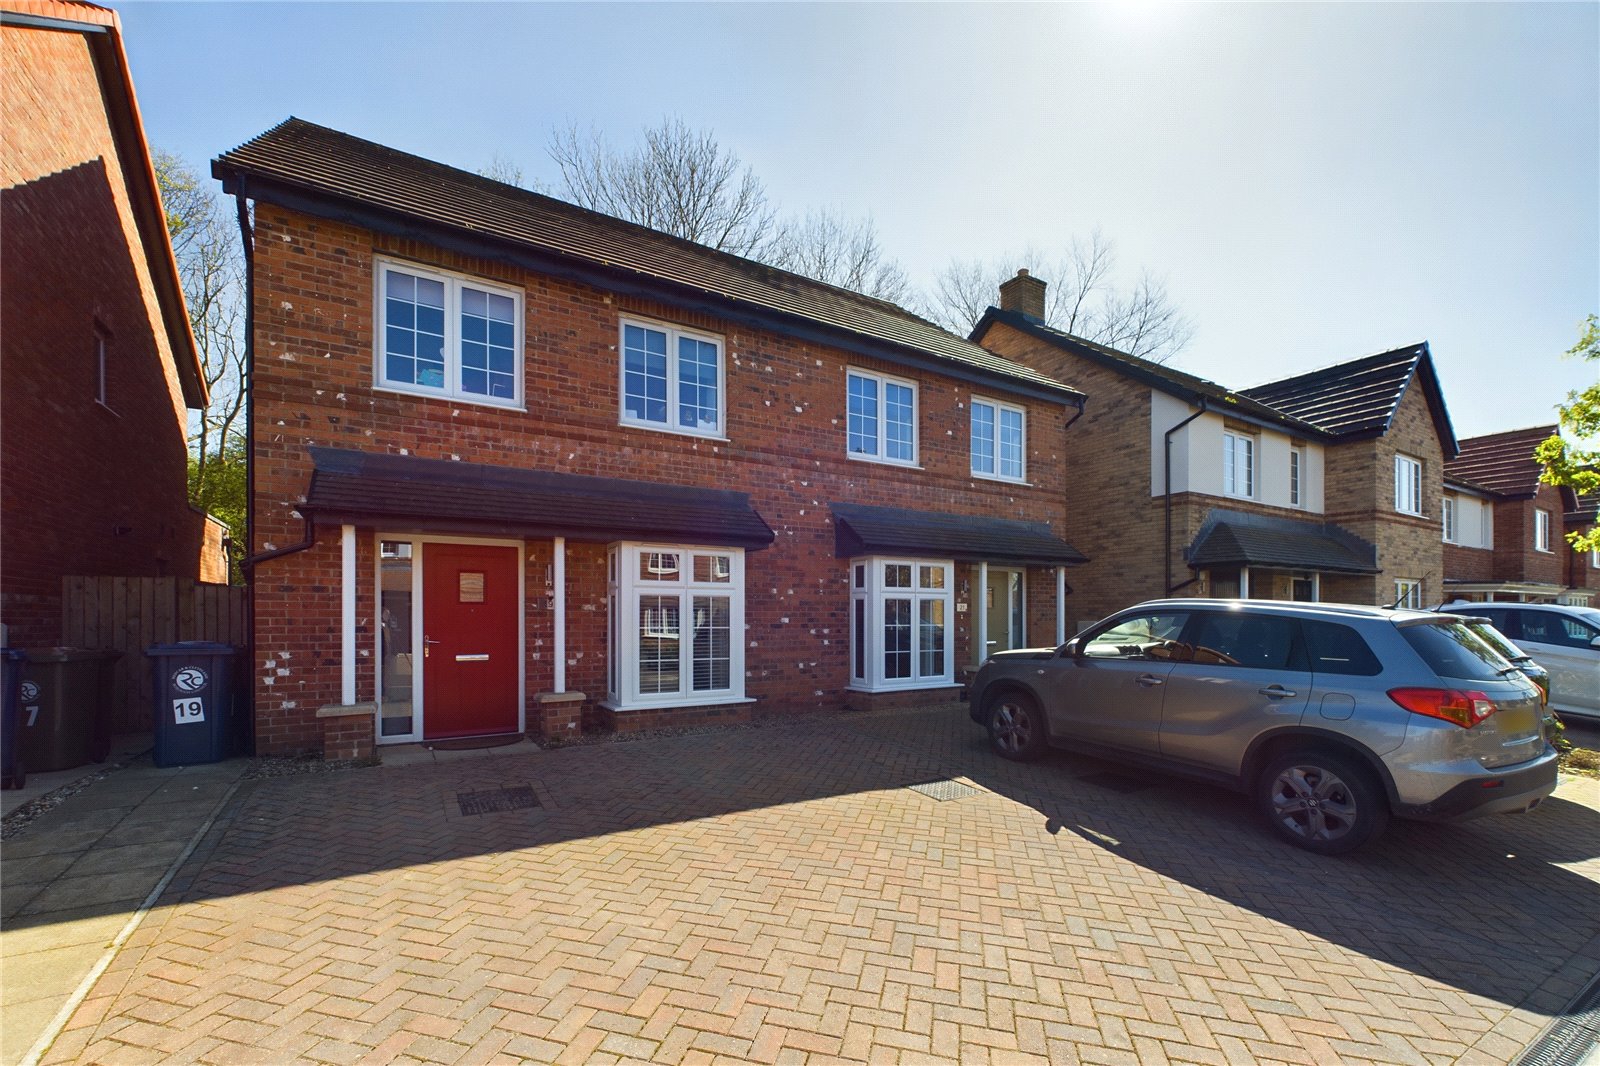 3 bed house for sale in Hunters Hill Close, Guisborough 1